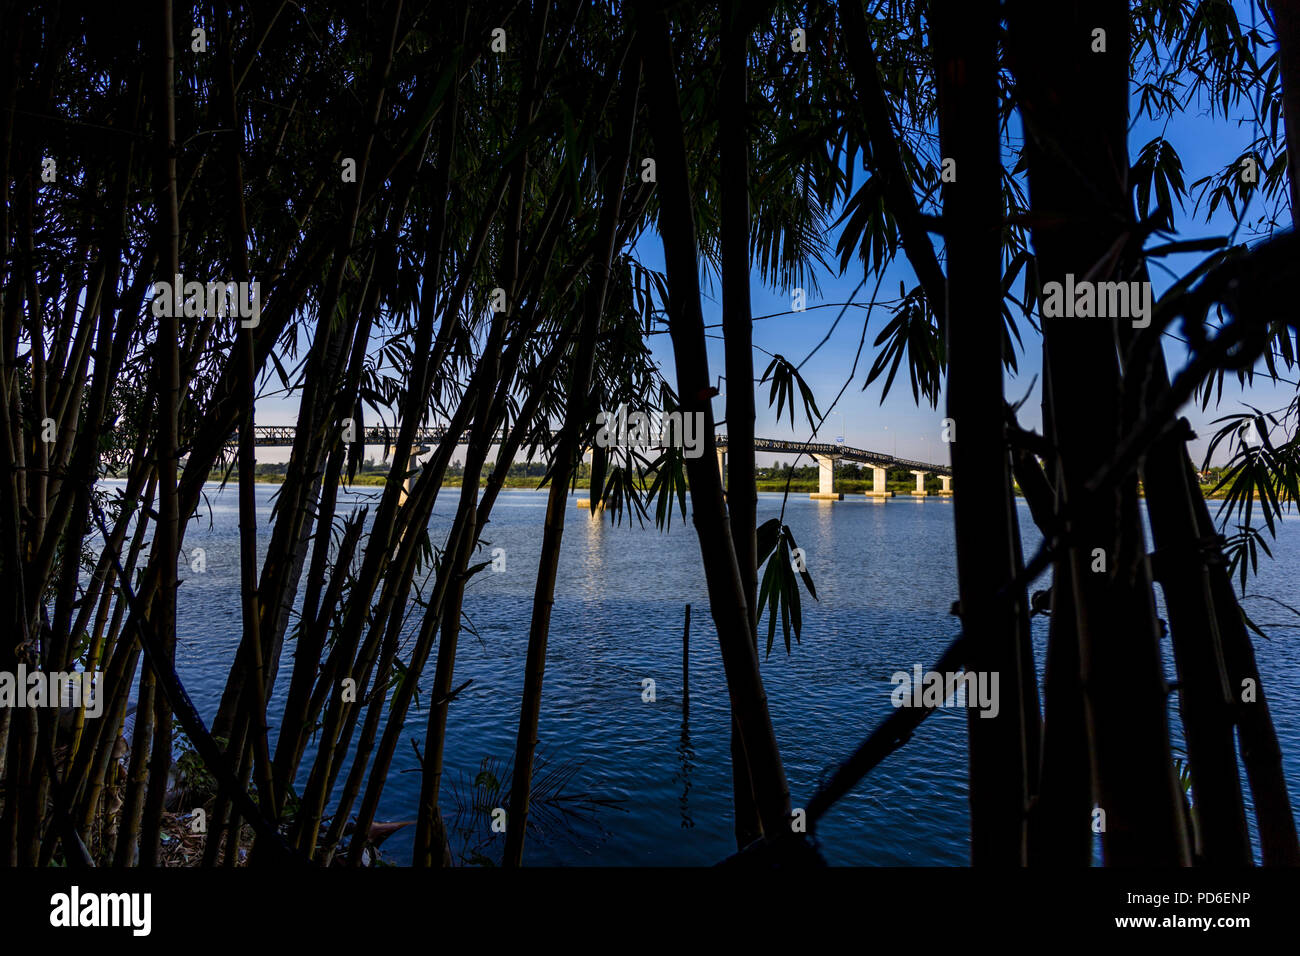 A scenic view through the silhouette of bamboo looking over the water and a bridge from Hoi An to Cam Kim Village. Blue water, blue sky and all throug Stock Photo